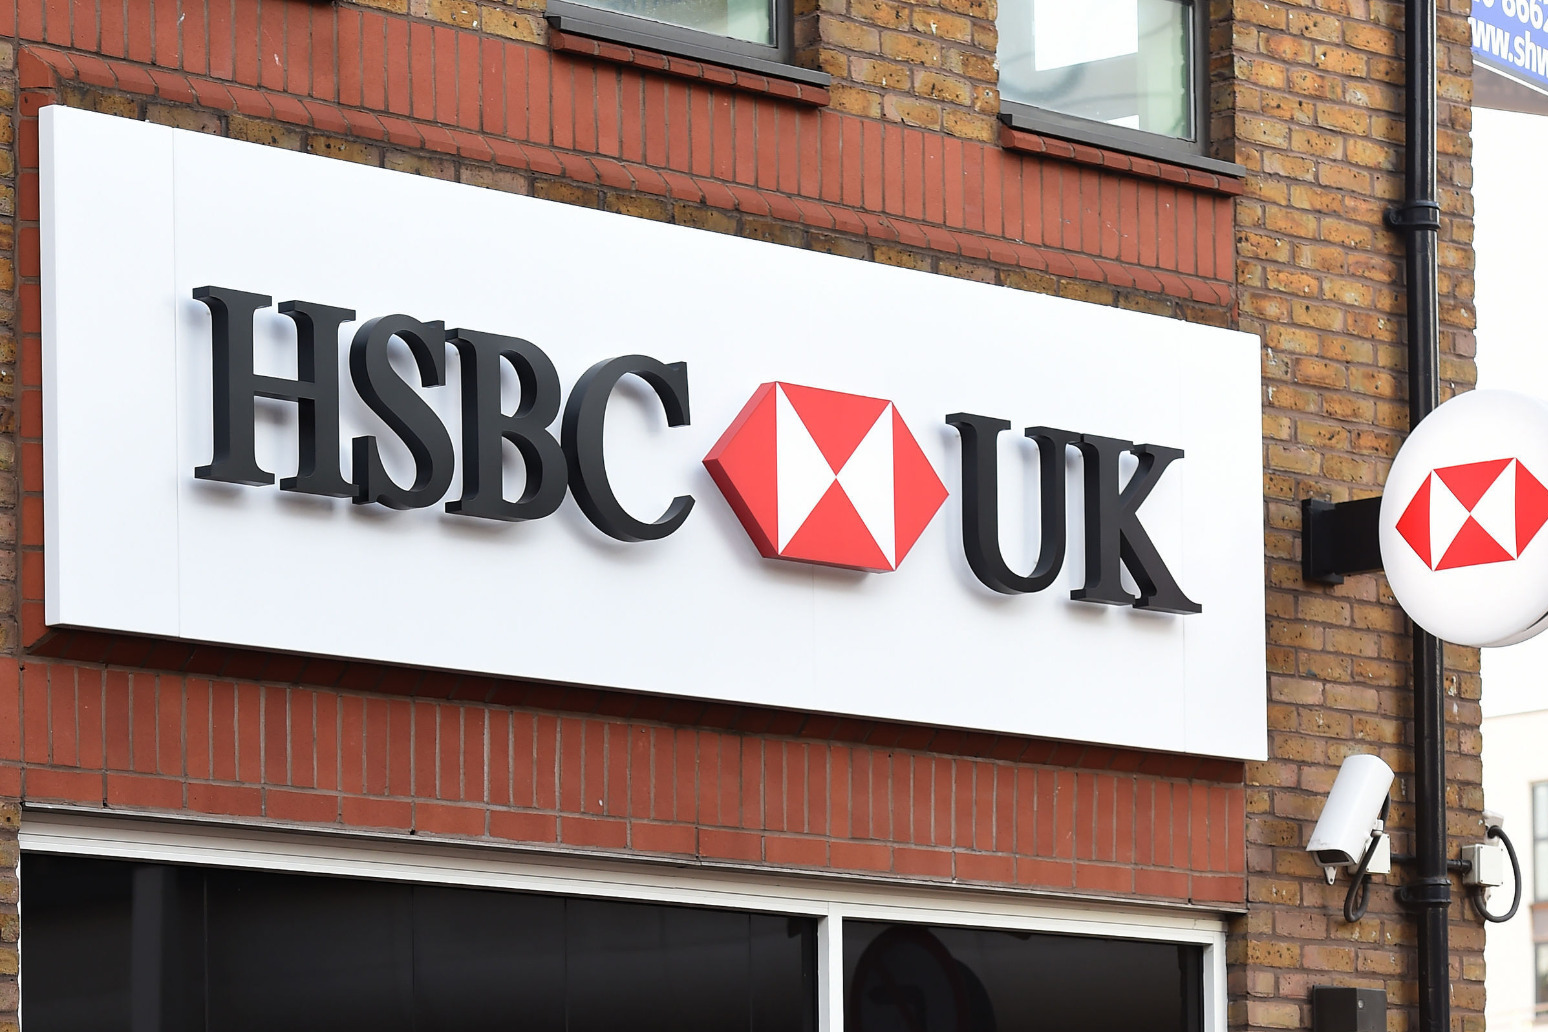 HSBC offers safe space for domestic abuse victims in every UK branch